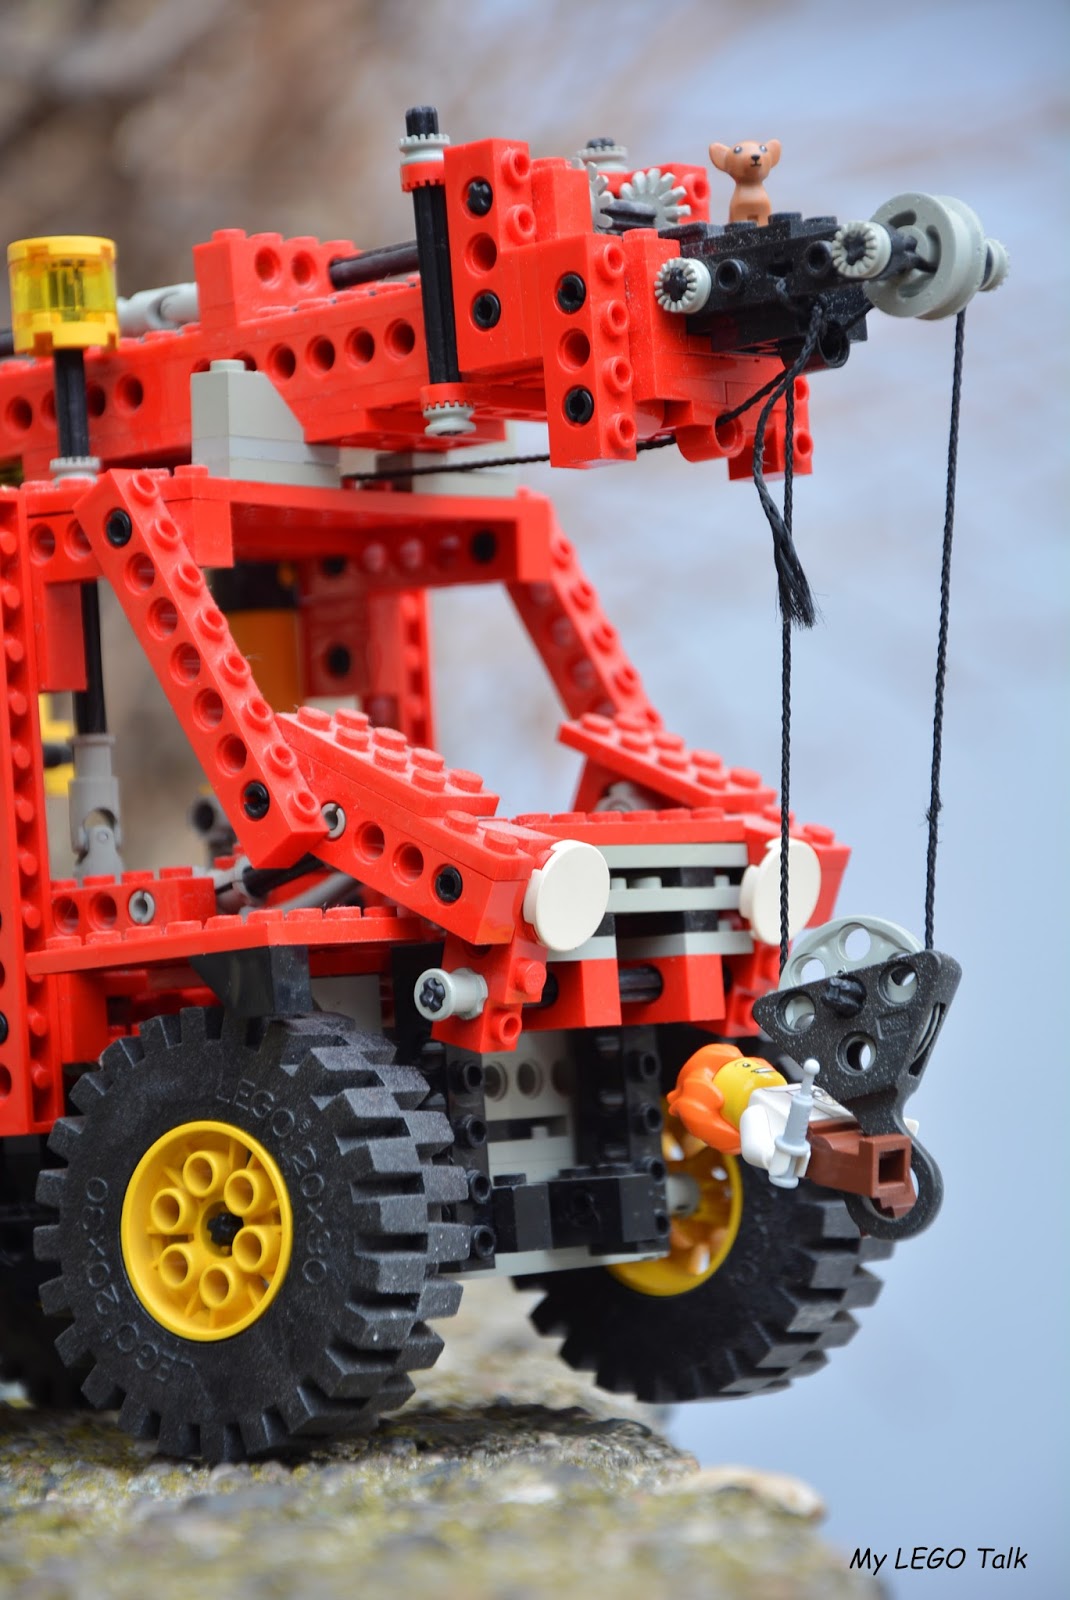 Legendary 8854 LEGO Power Crane - about Dr. Jey mission :-) My Lego